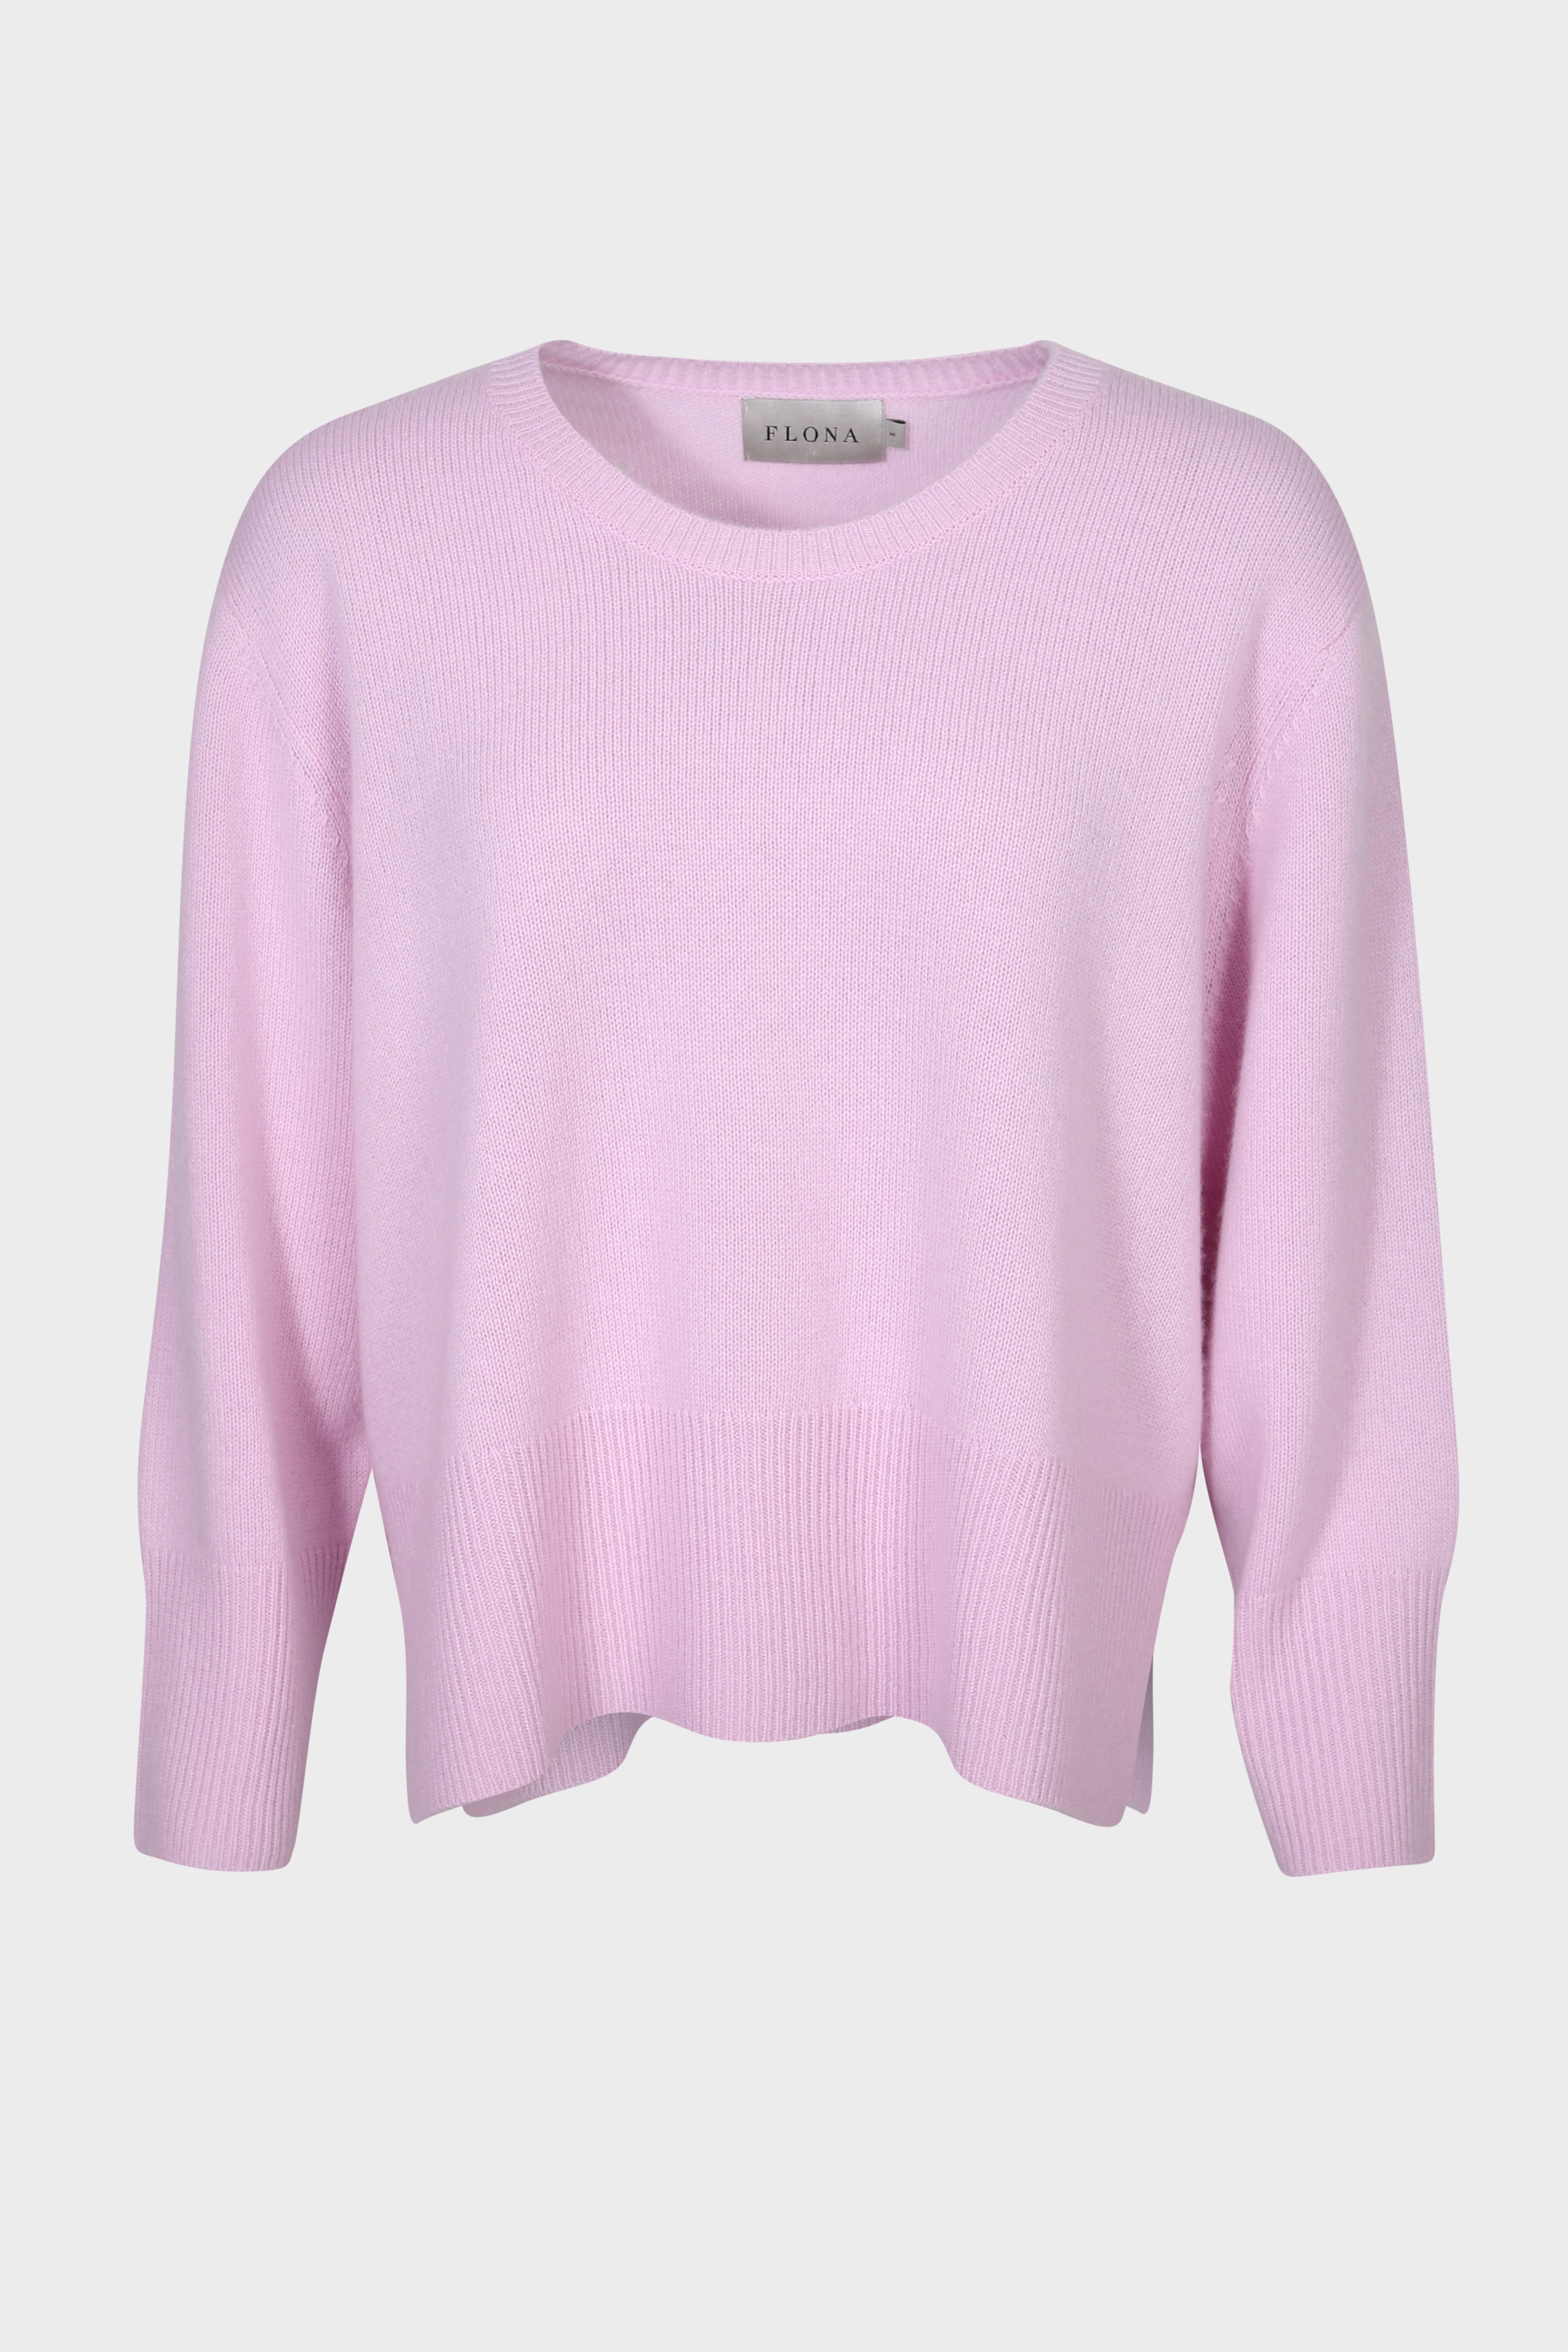 FLONA Cashmere Sweater in Pink M